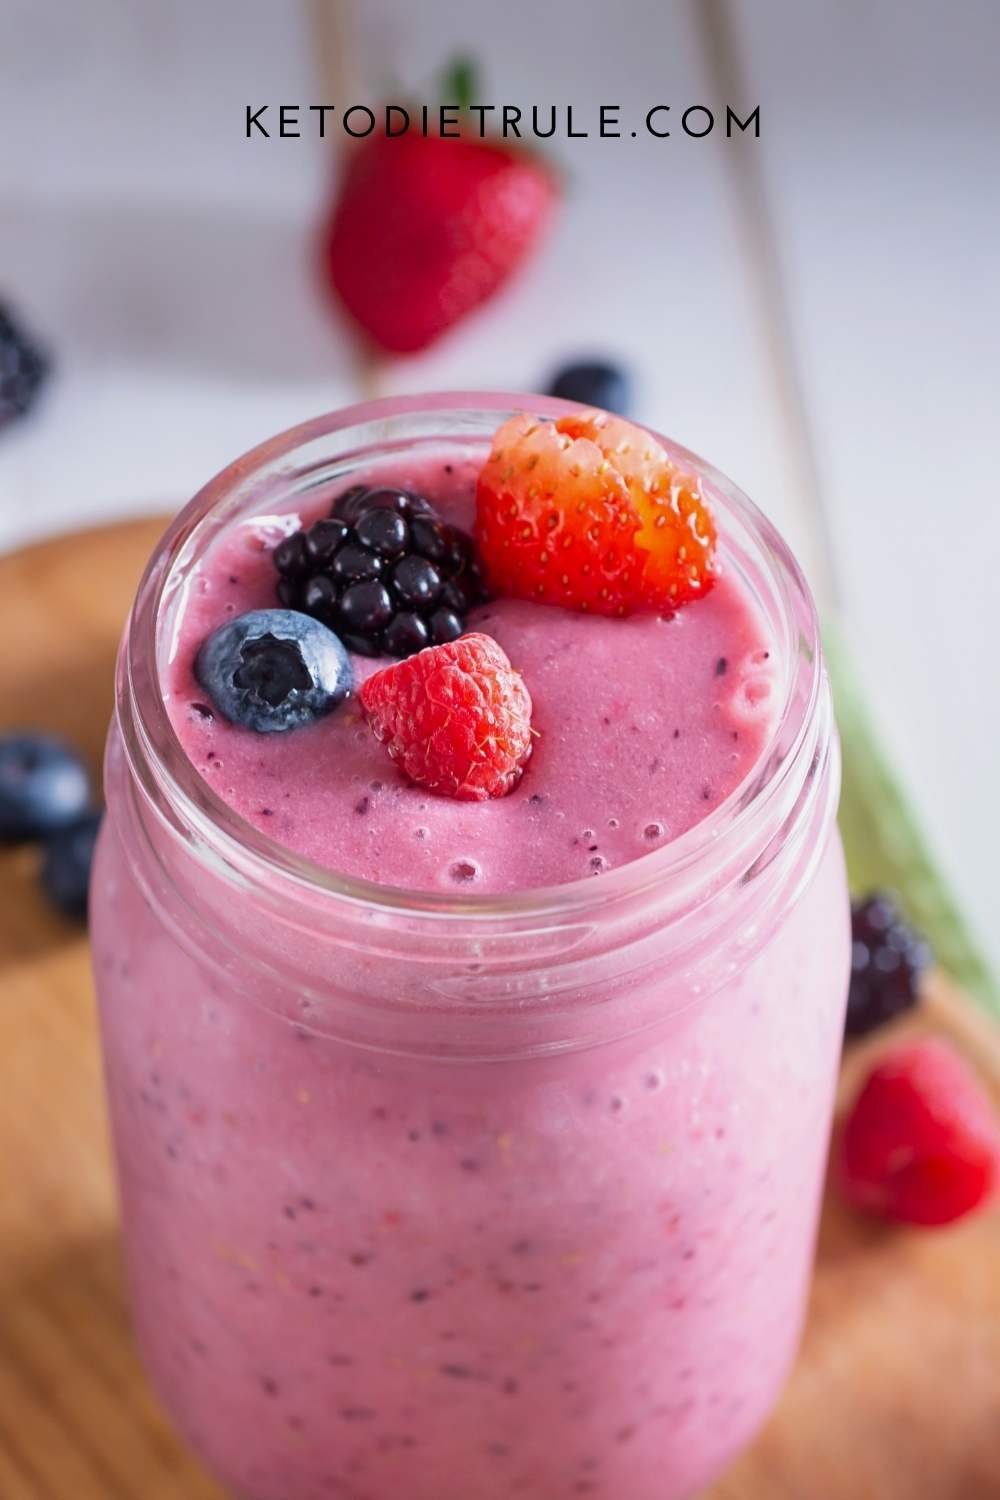 Sip Your Way to Slimmer Body With These  Fat-Burning Keto Smoothies